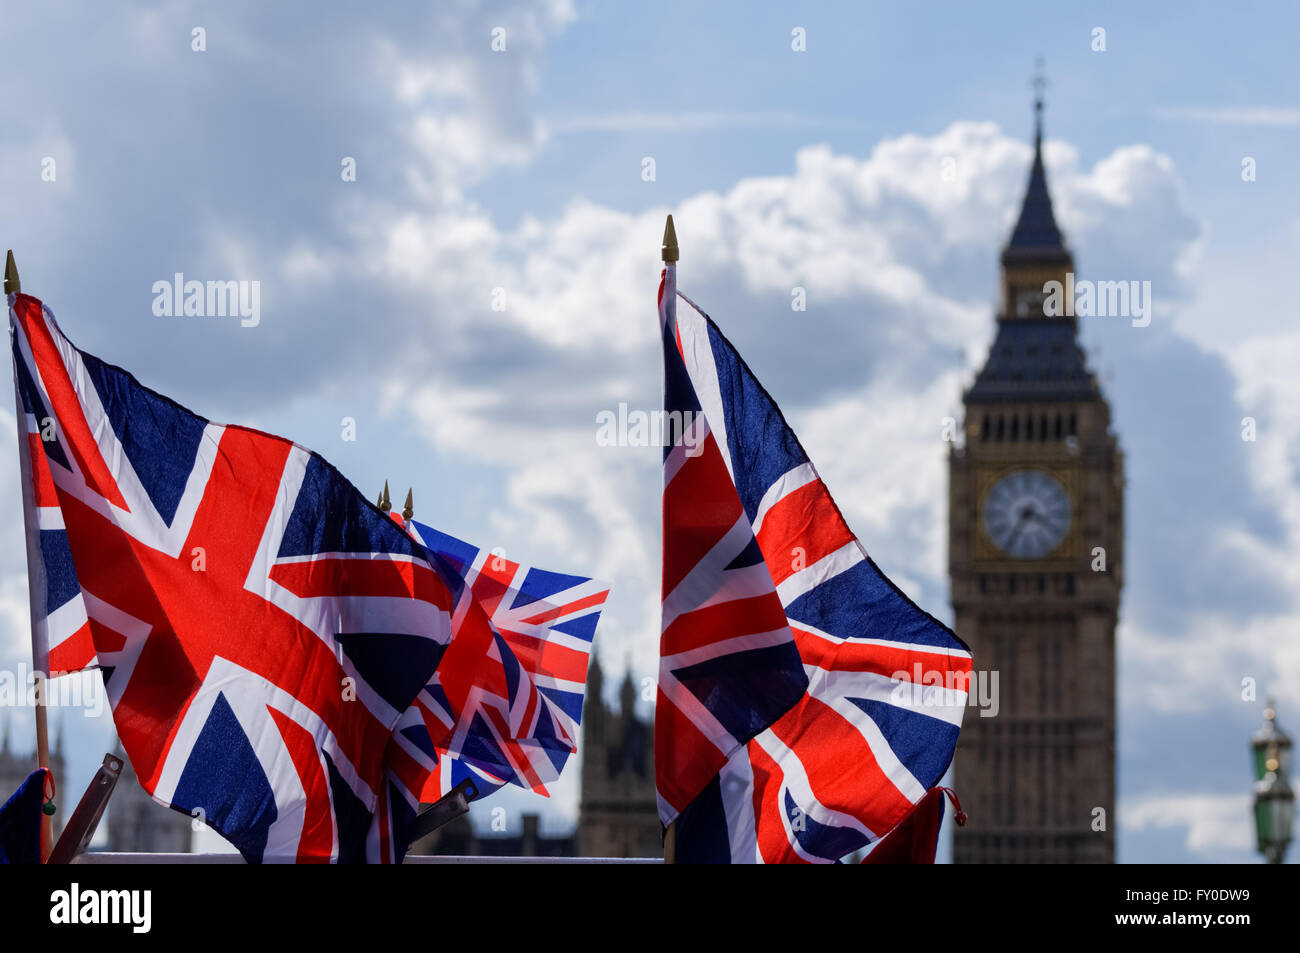 Big Ben at the Palace of Westminster with Union Jack flags, London England United Kingdom UK Stock Photo